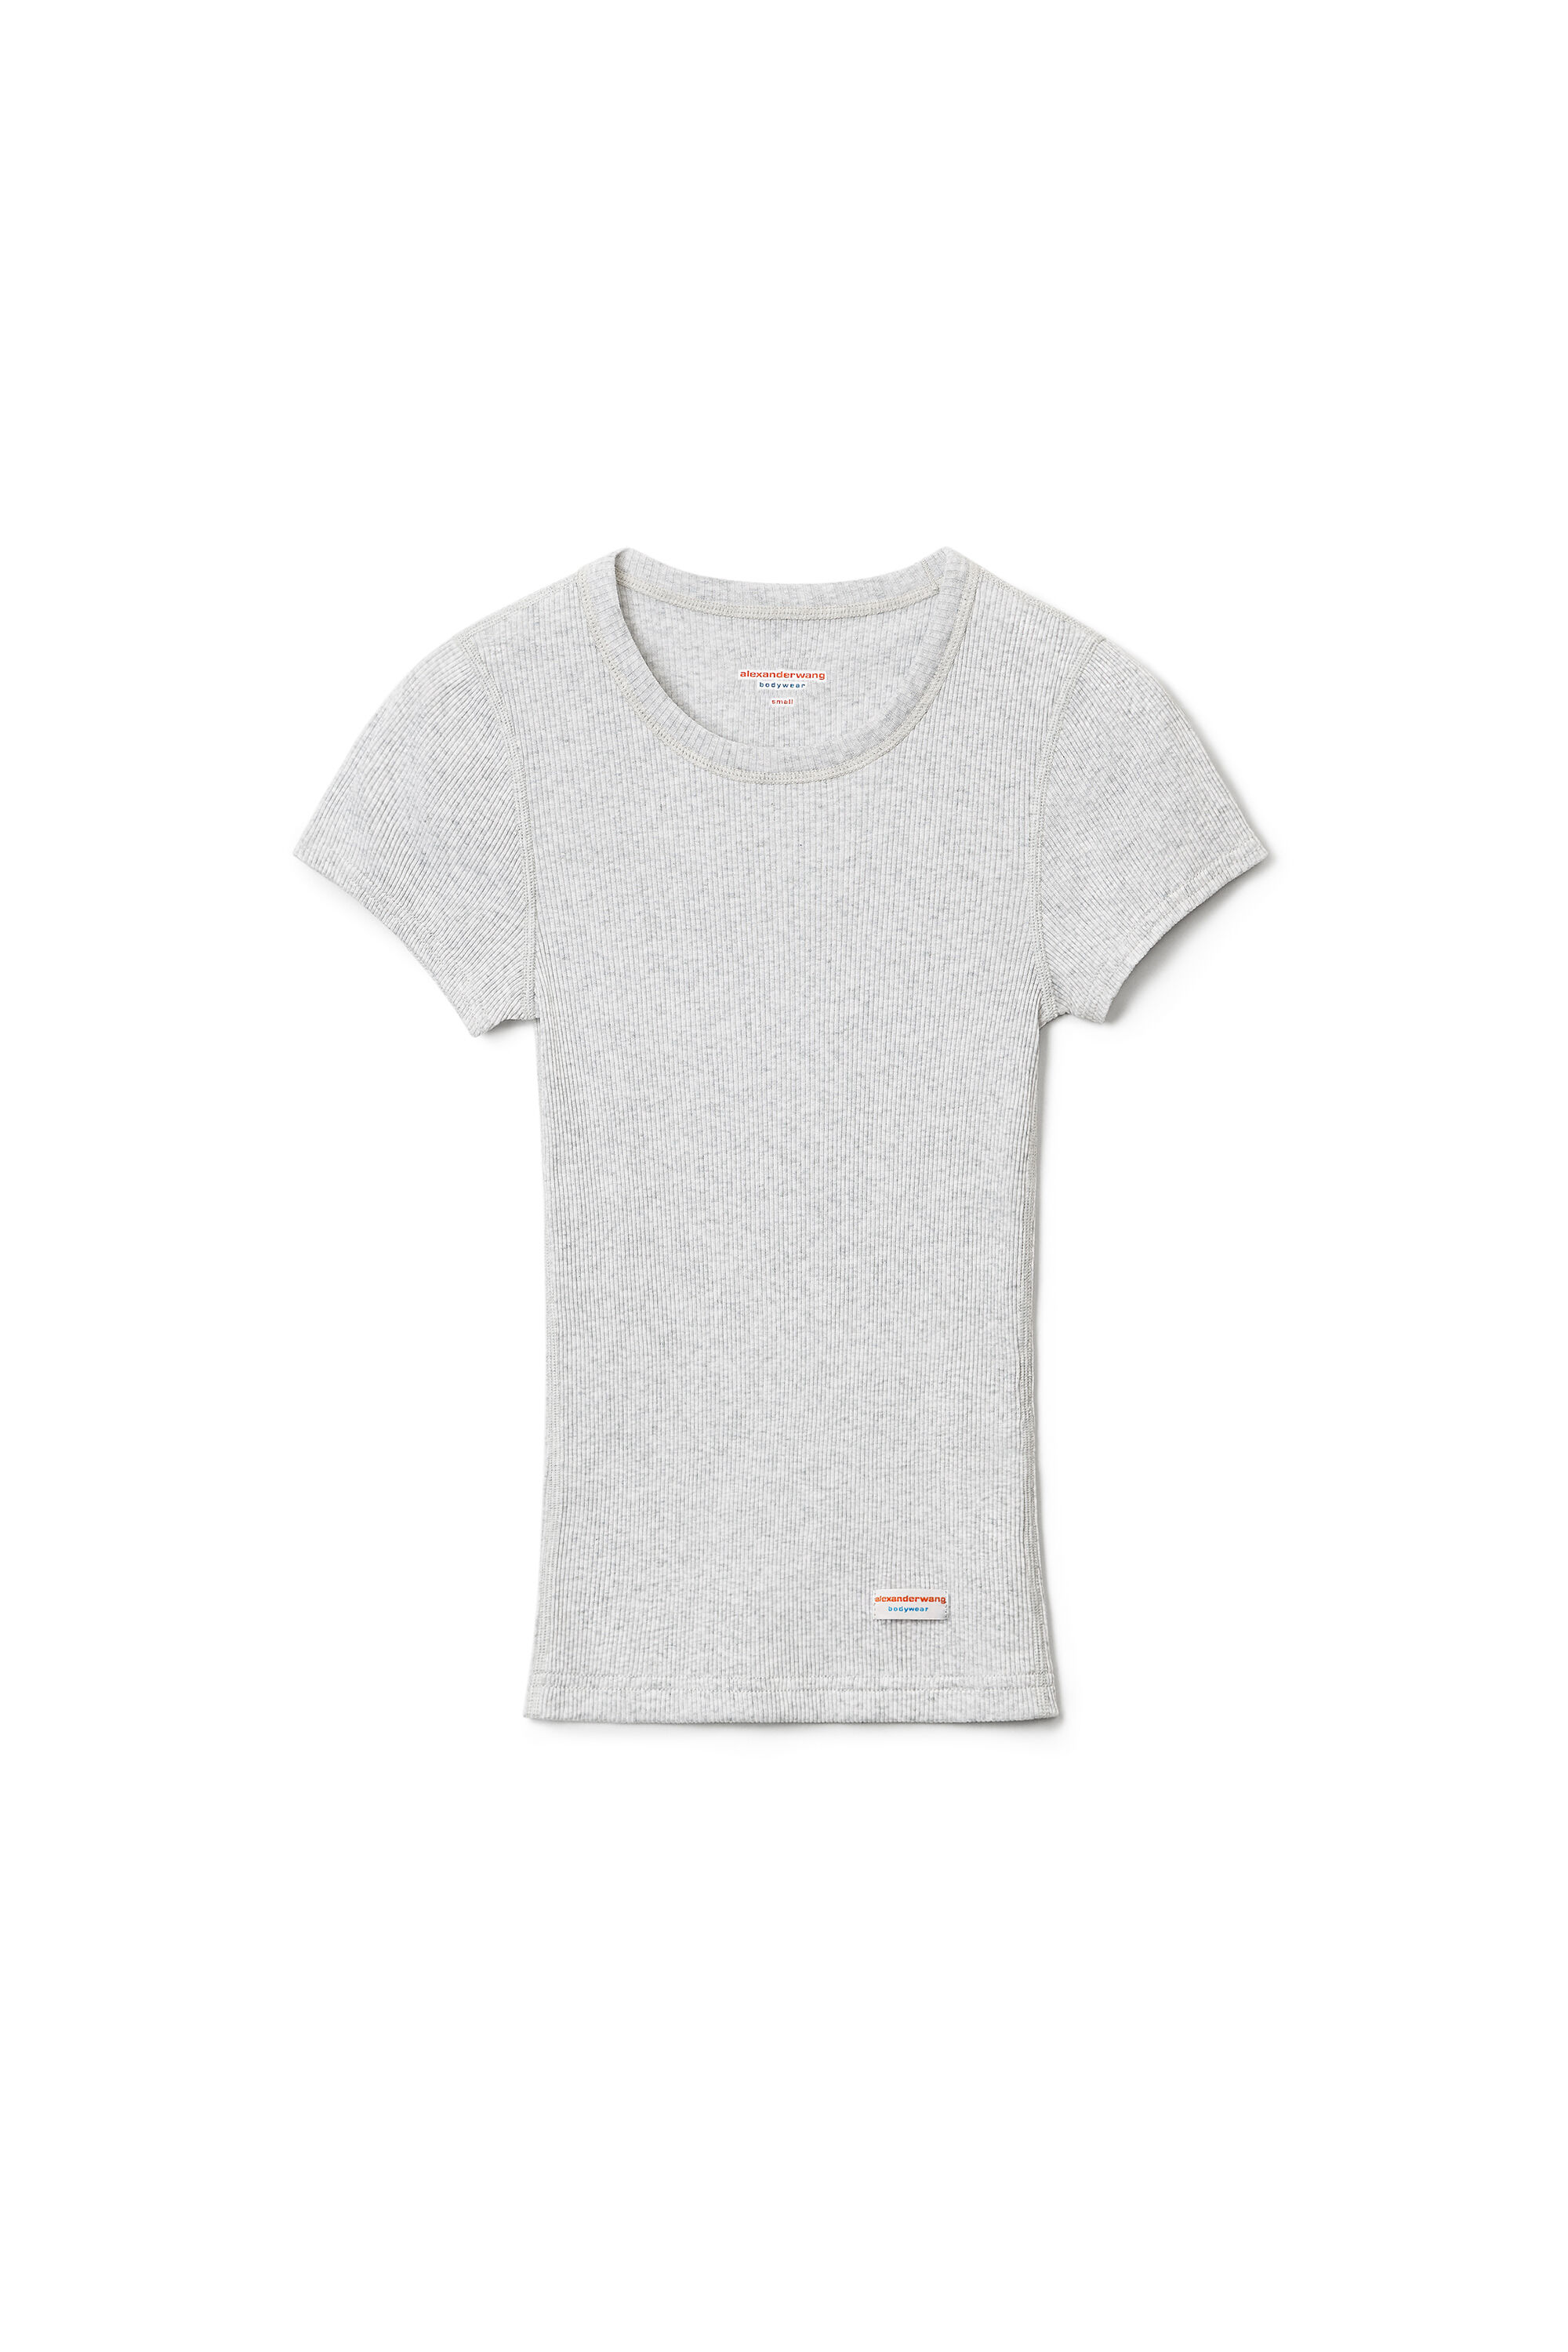 Short-Sleeve Tee in Ribbed Cotton Jersey in HEATHER GREY 